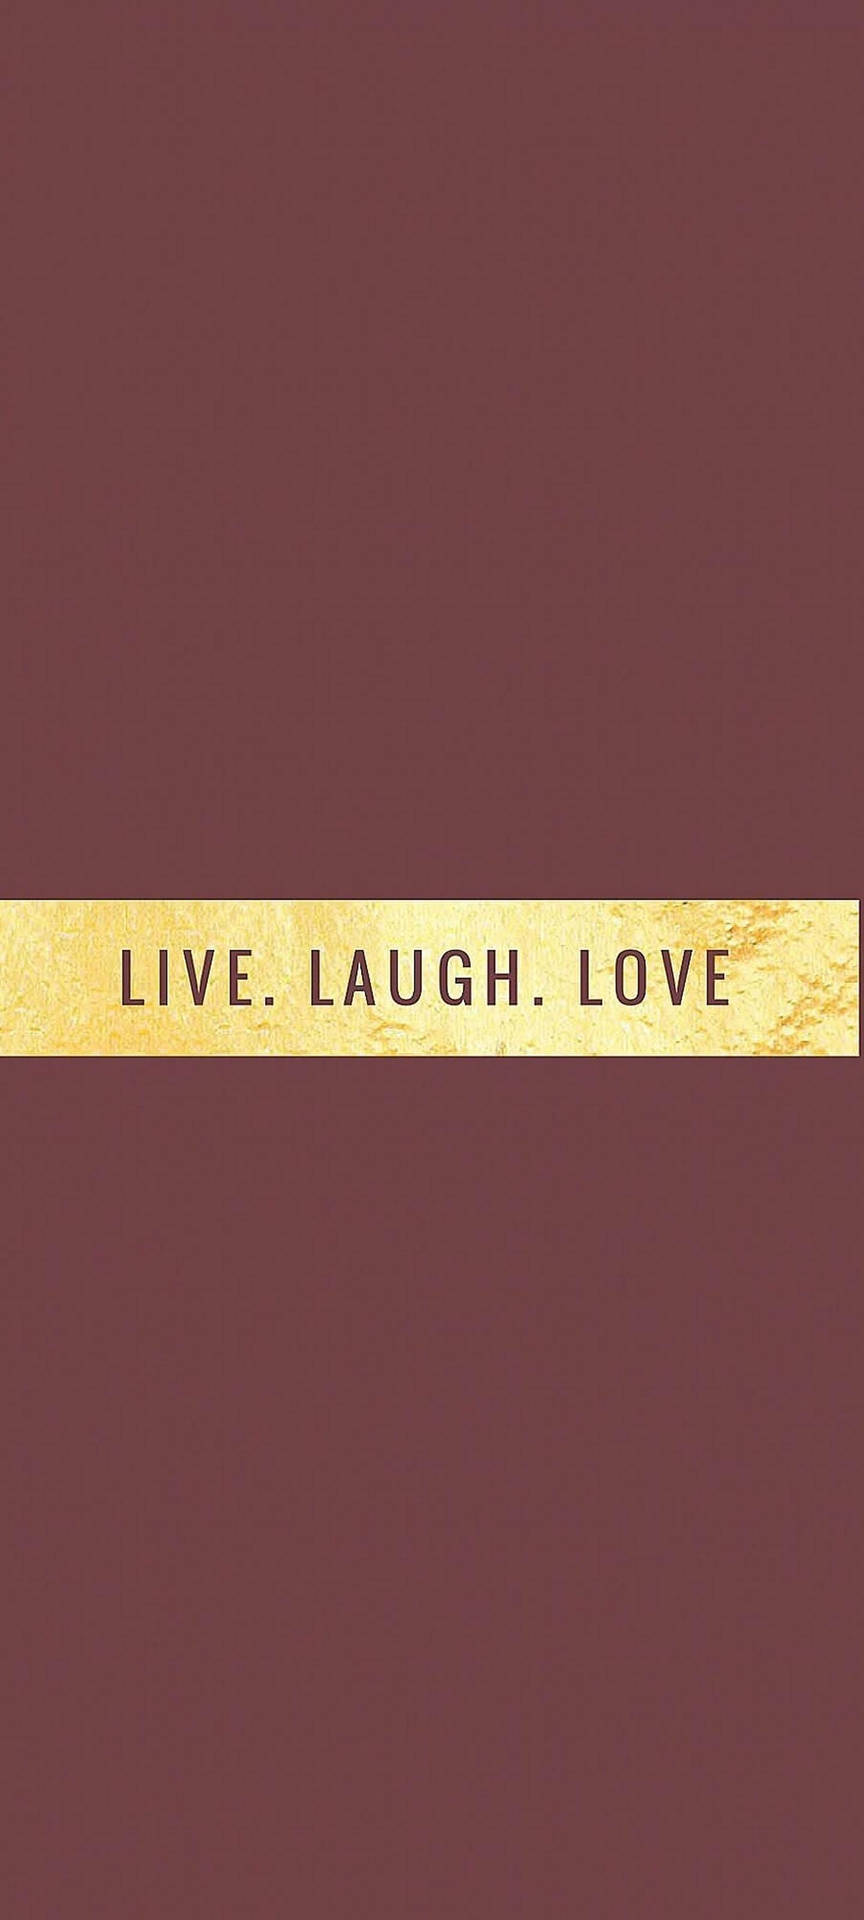 Samsung Galaxy Note 20 Ultra Live Laugh Love Background